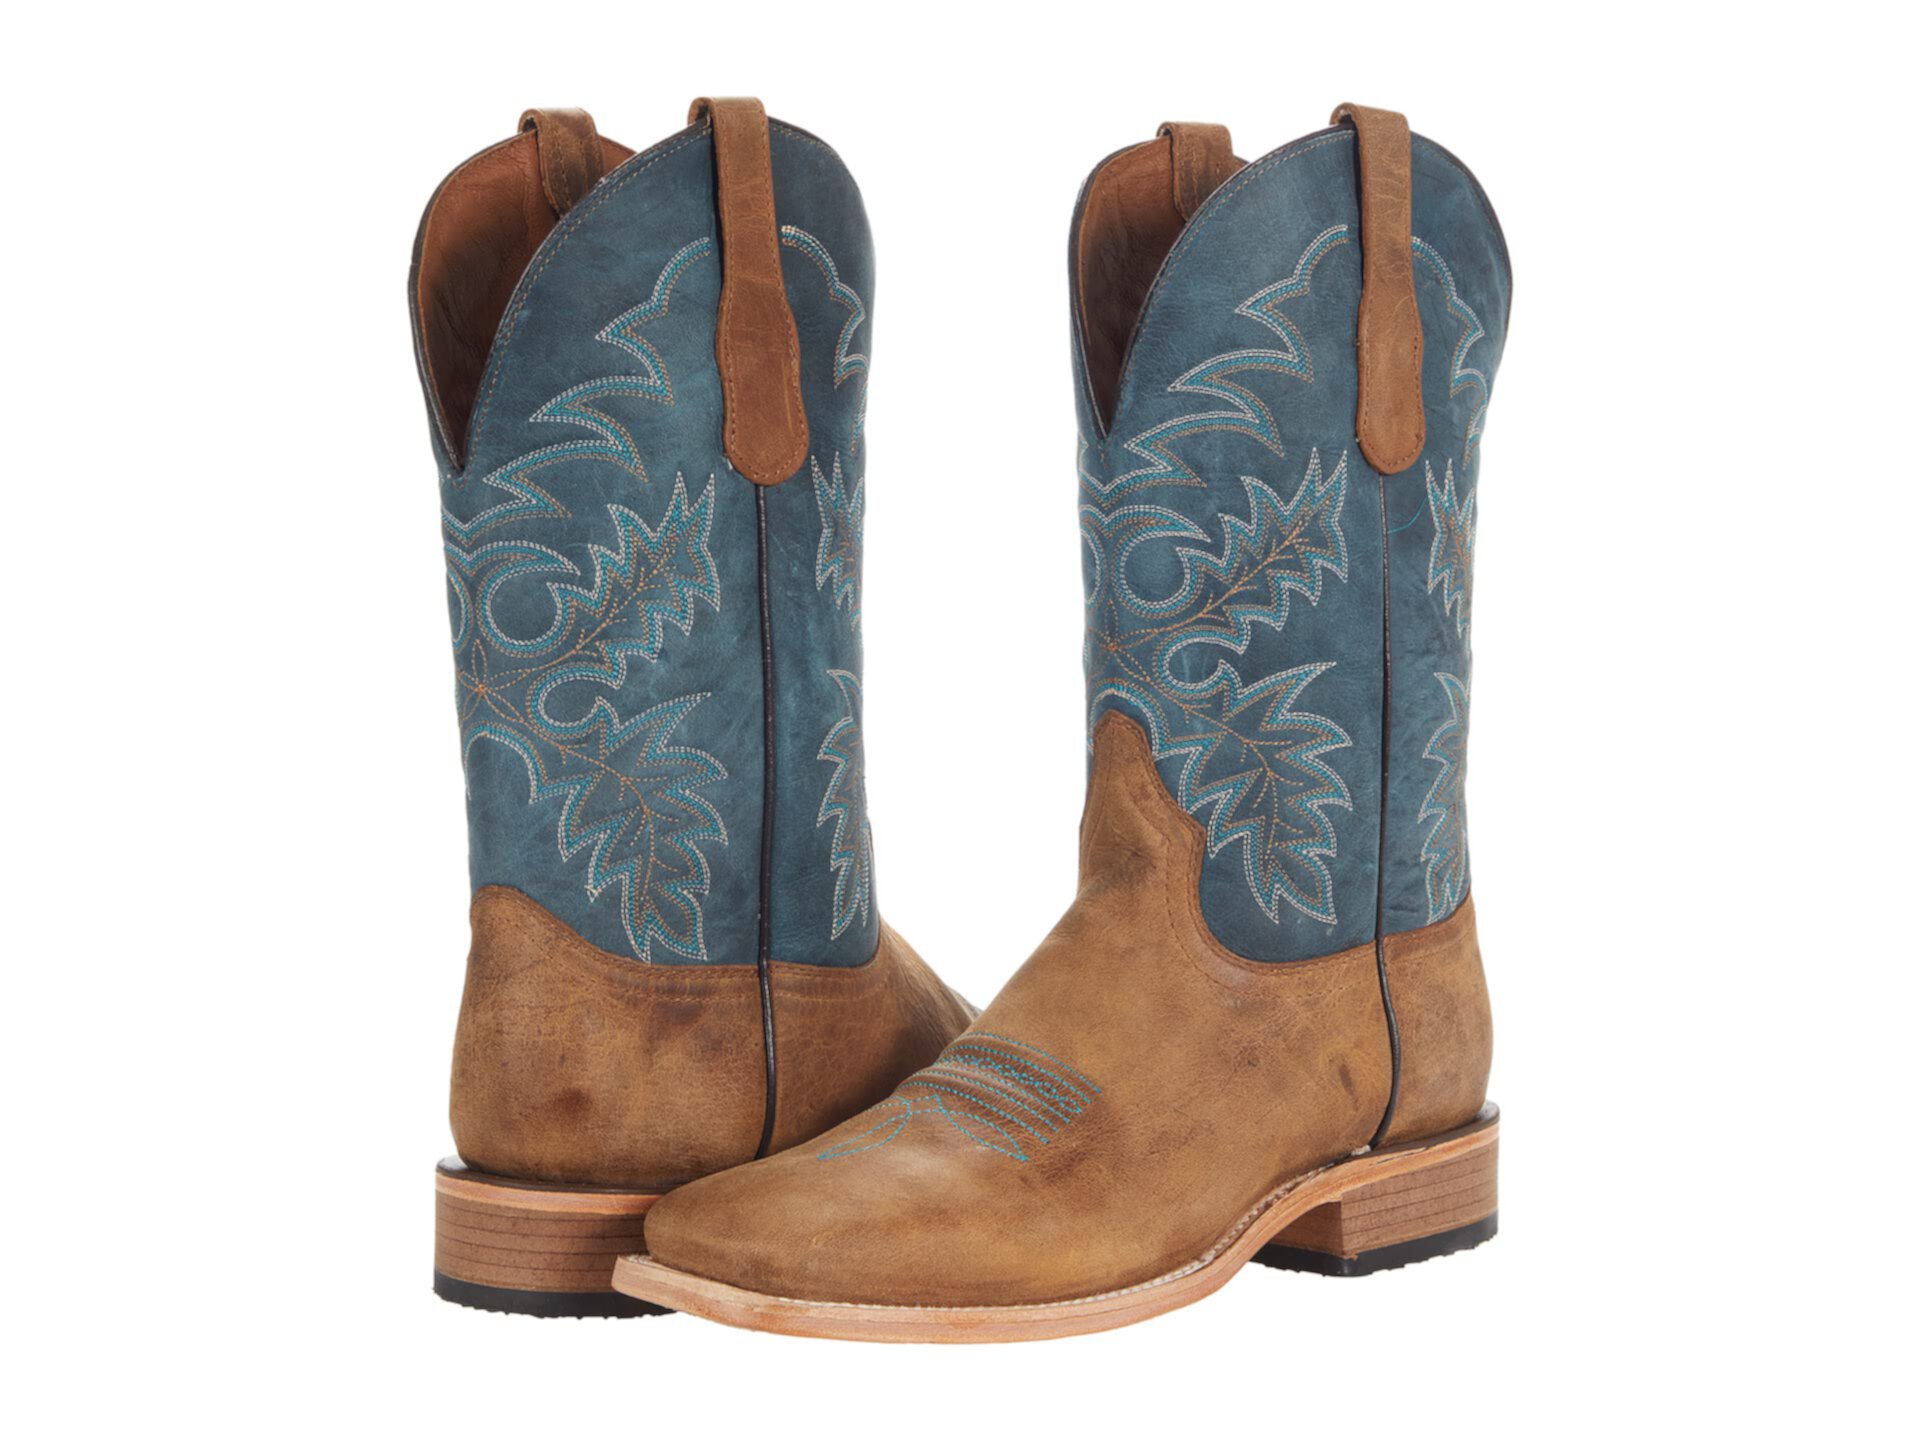 L5802 Corral Boots